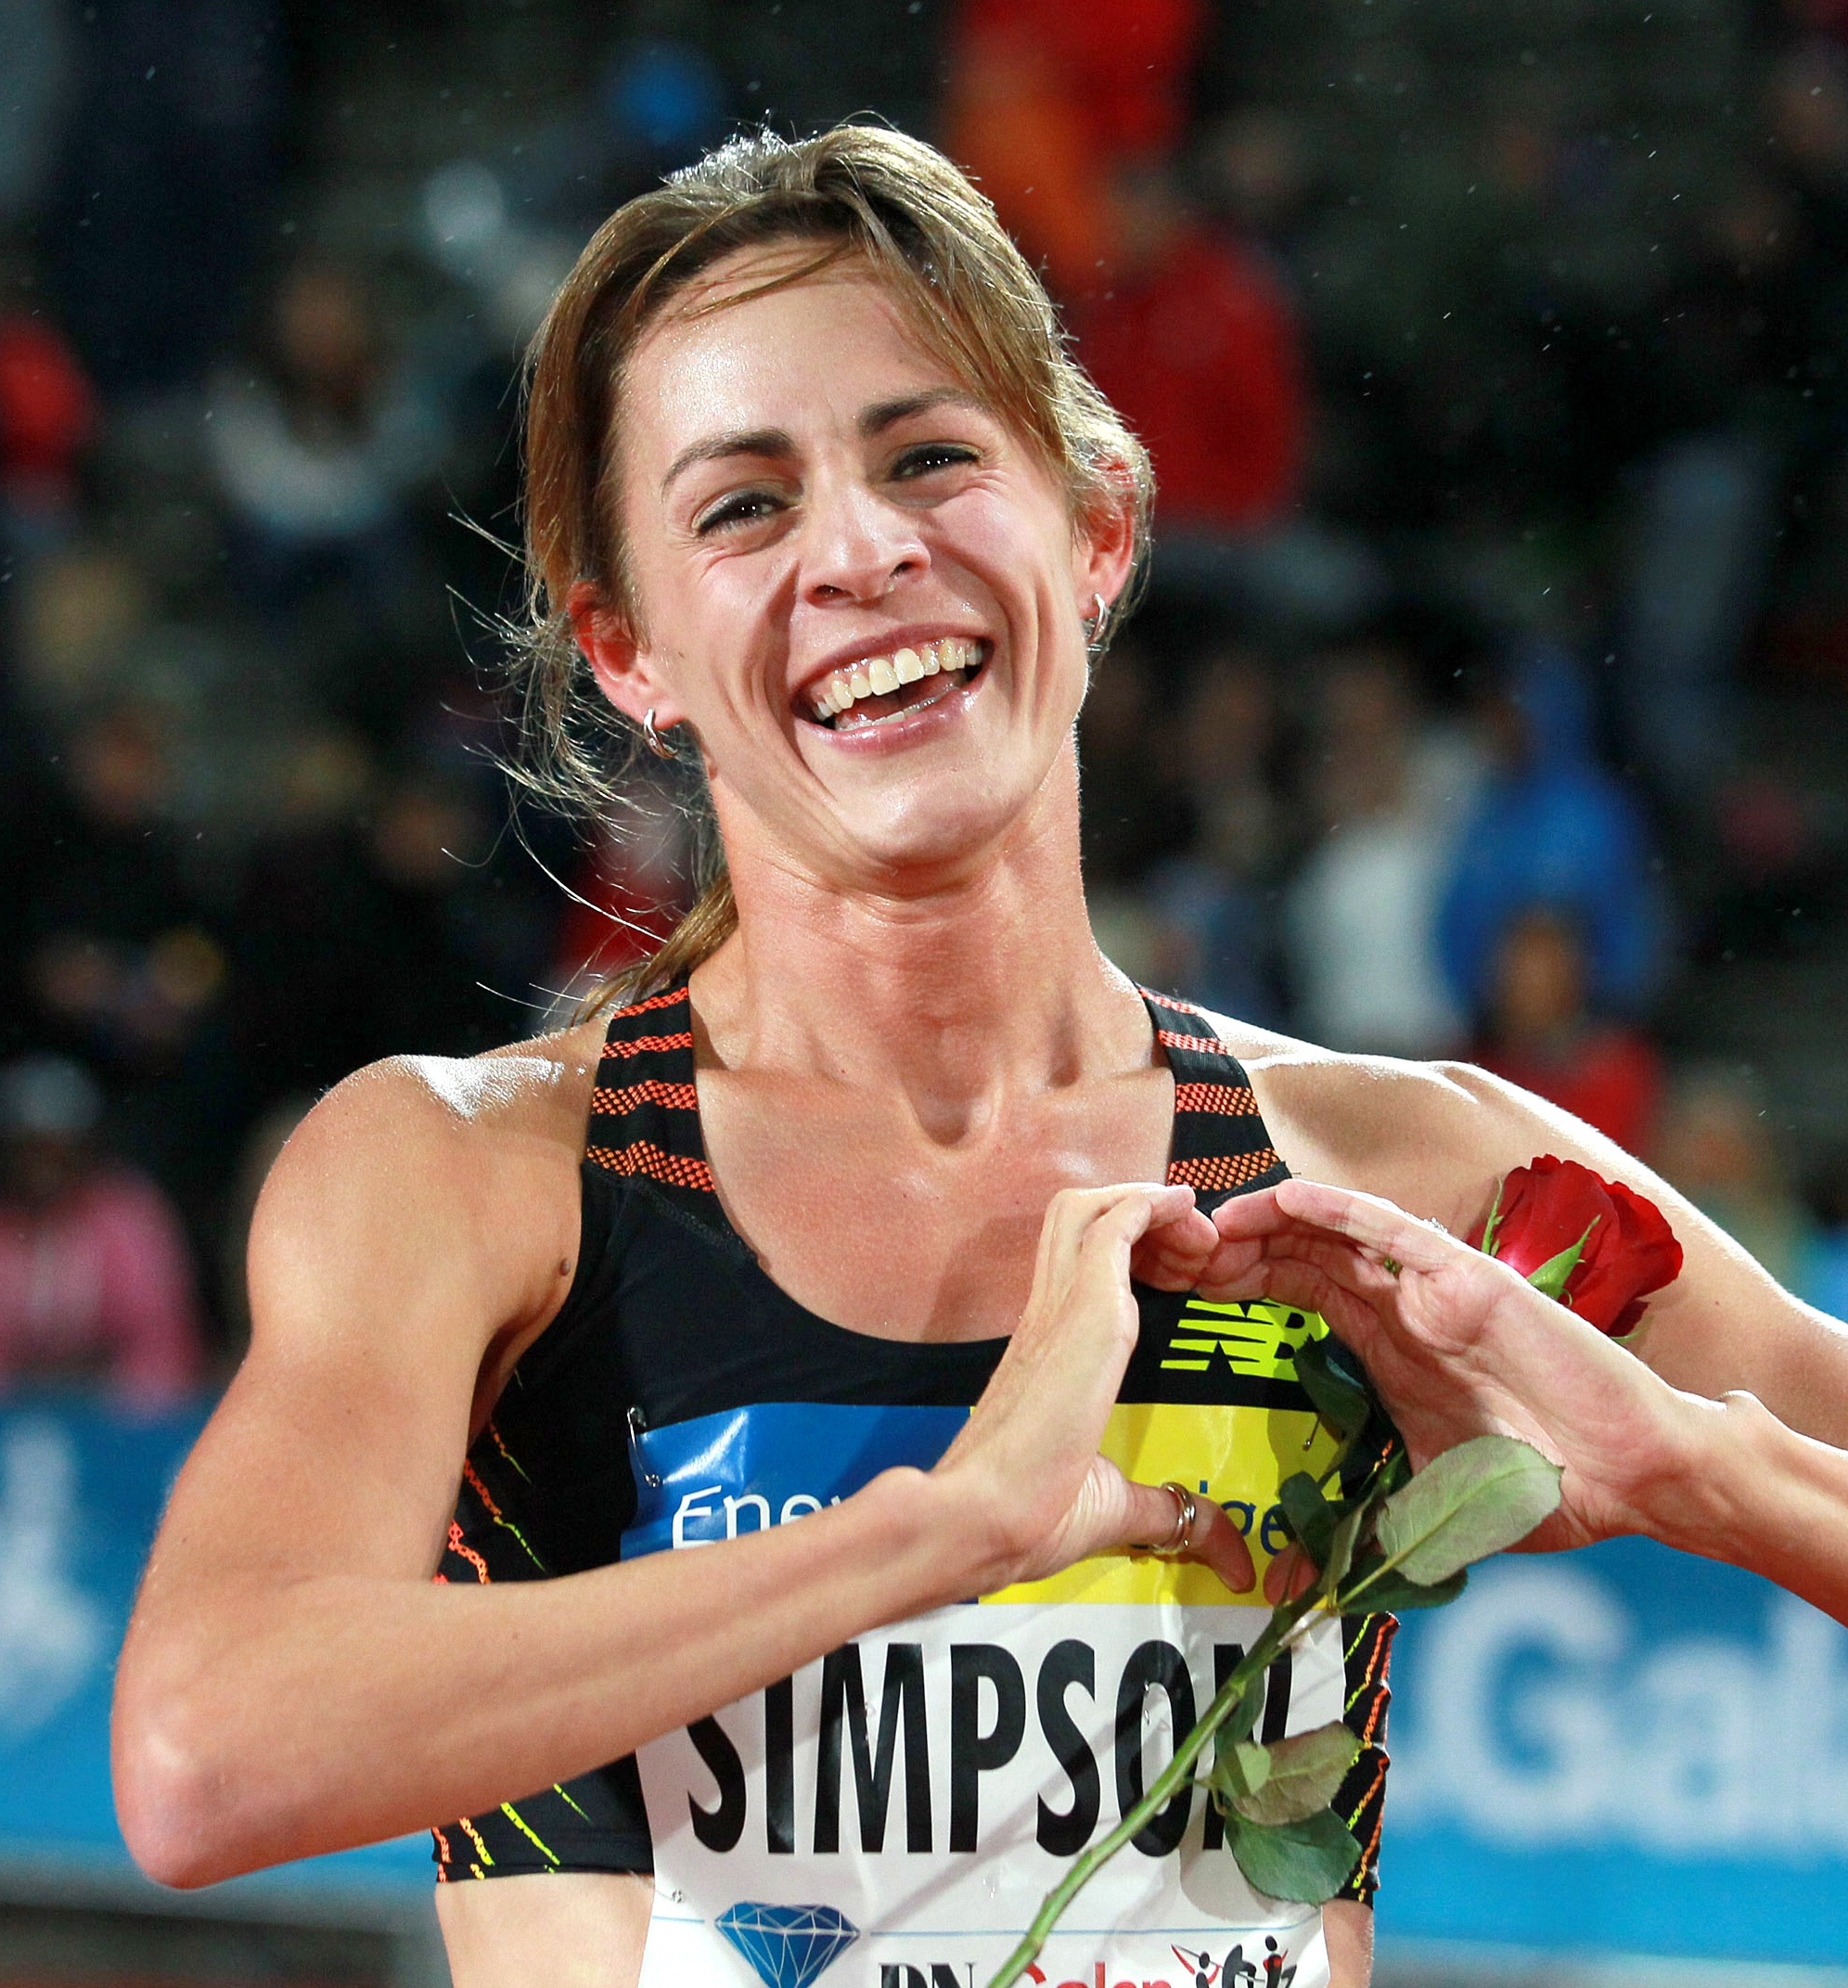 Jenny Simpson: It’s good to be Queen : News : Bring Back the Mile